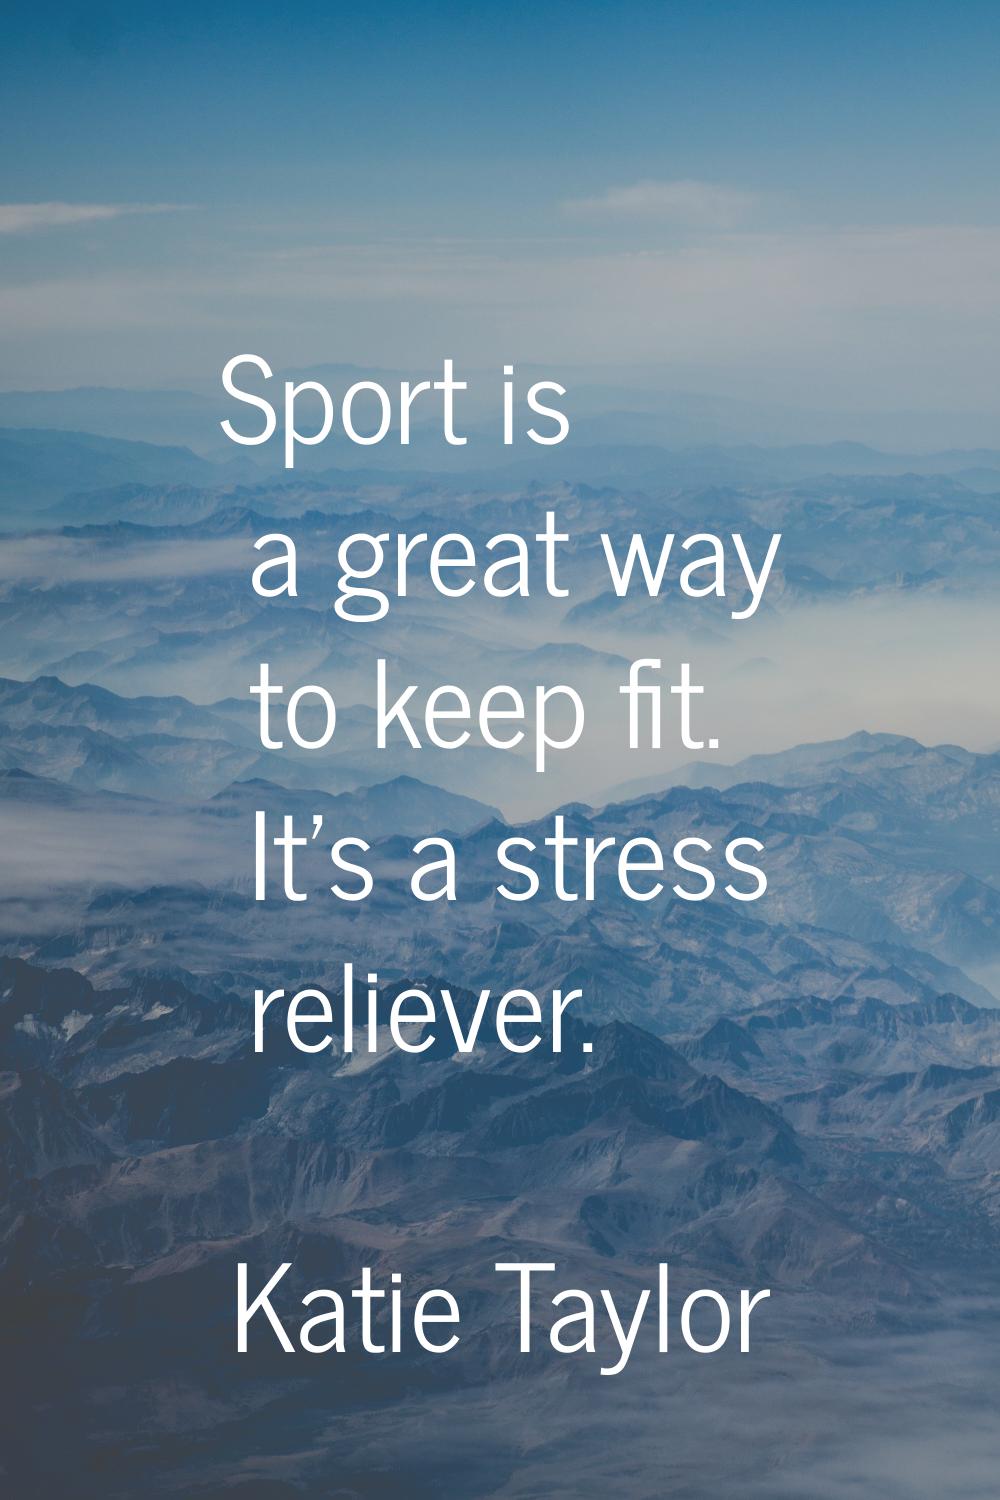 Sport is a great way to keep fit. It's a stress reliever.